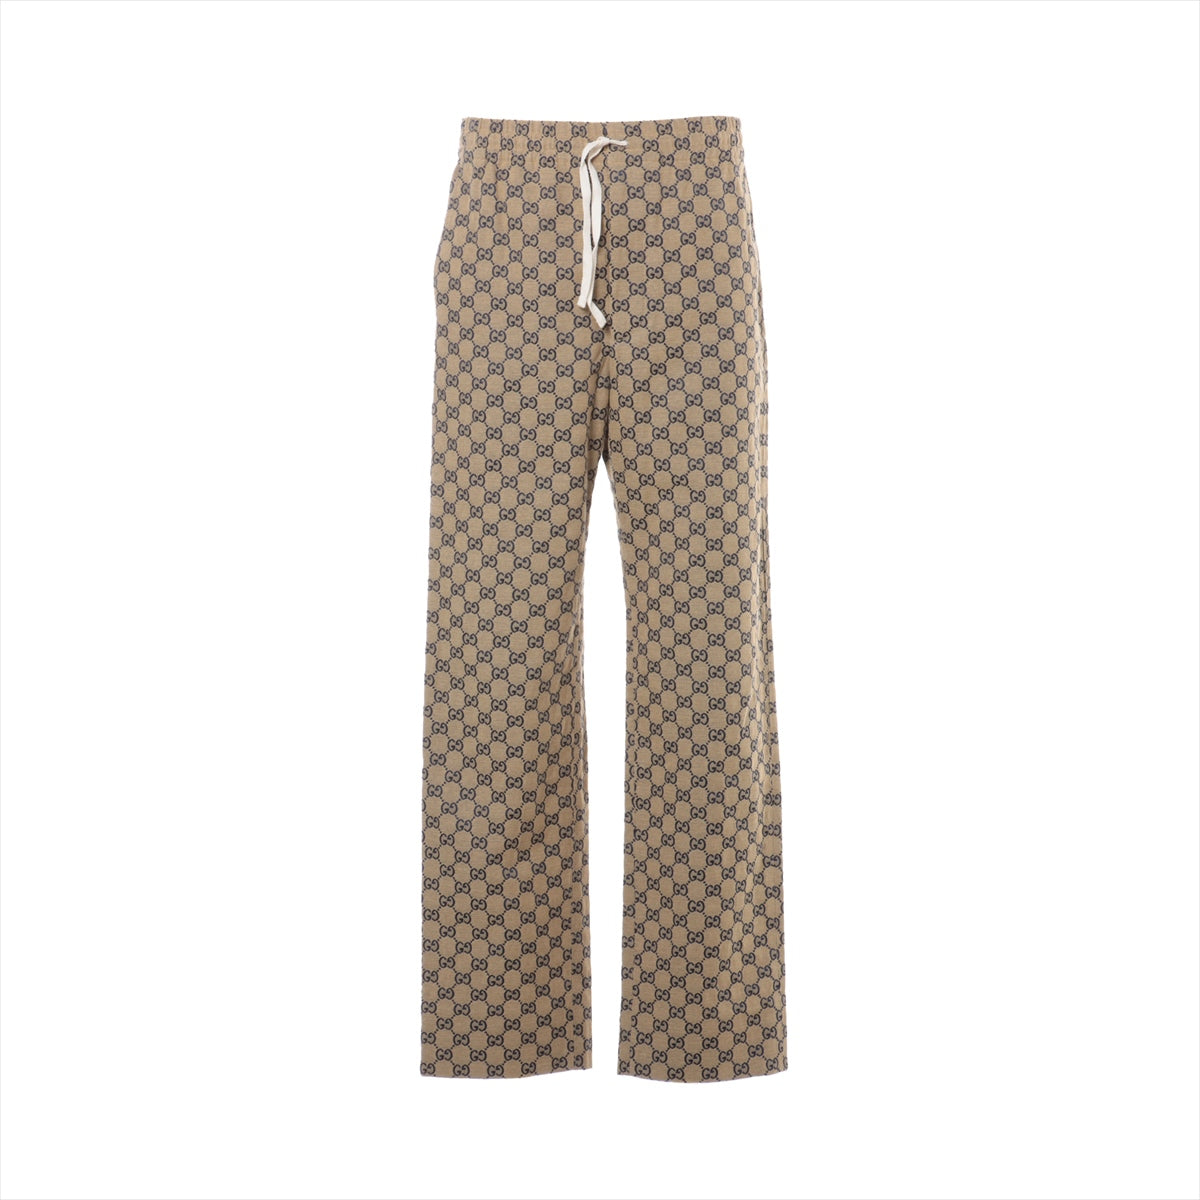 GG cotton-blend wide-leg pants in brown - Gucci